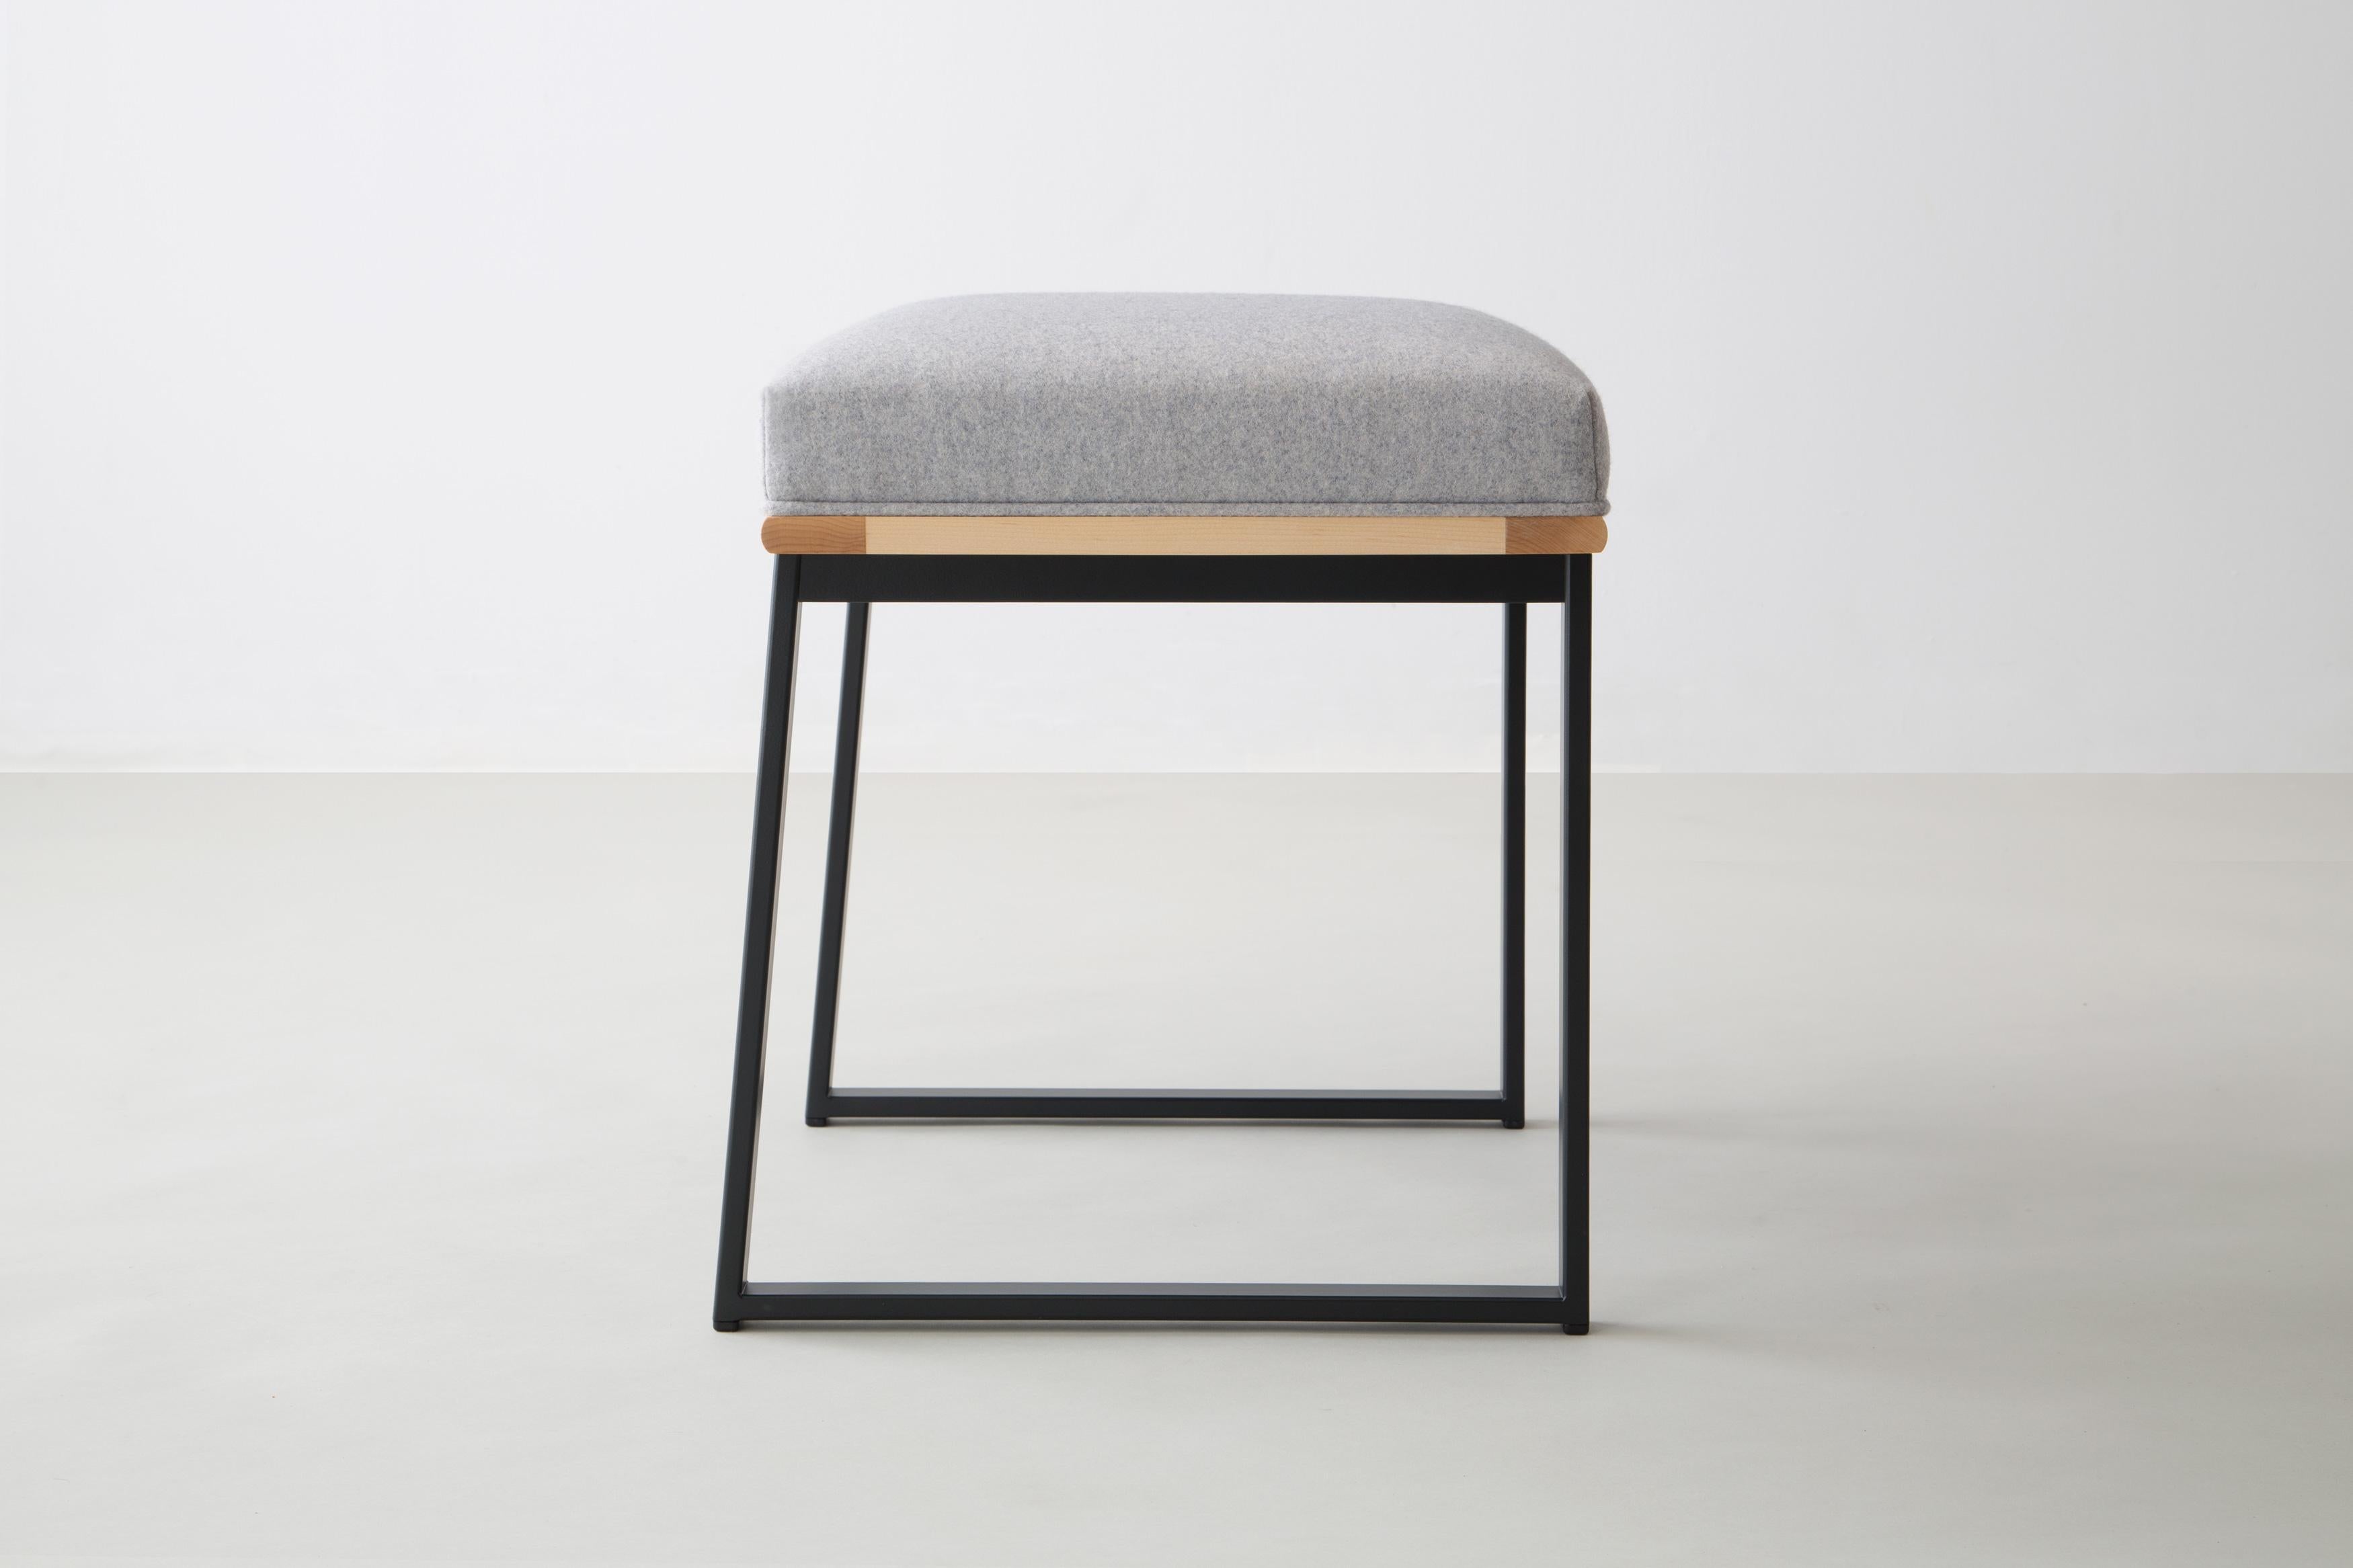 The DGD Dining Stool finds formality and comfort in the industrial and organic.

Powder coated steel frame shown in black and available in any standard RAL colors.

Shown in maple with Divina MD wool felt by Kvadrat.

Available with:

Wood in ash,